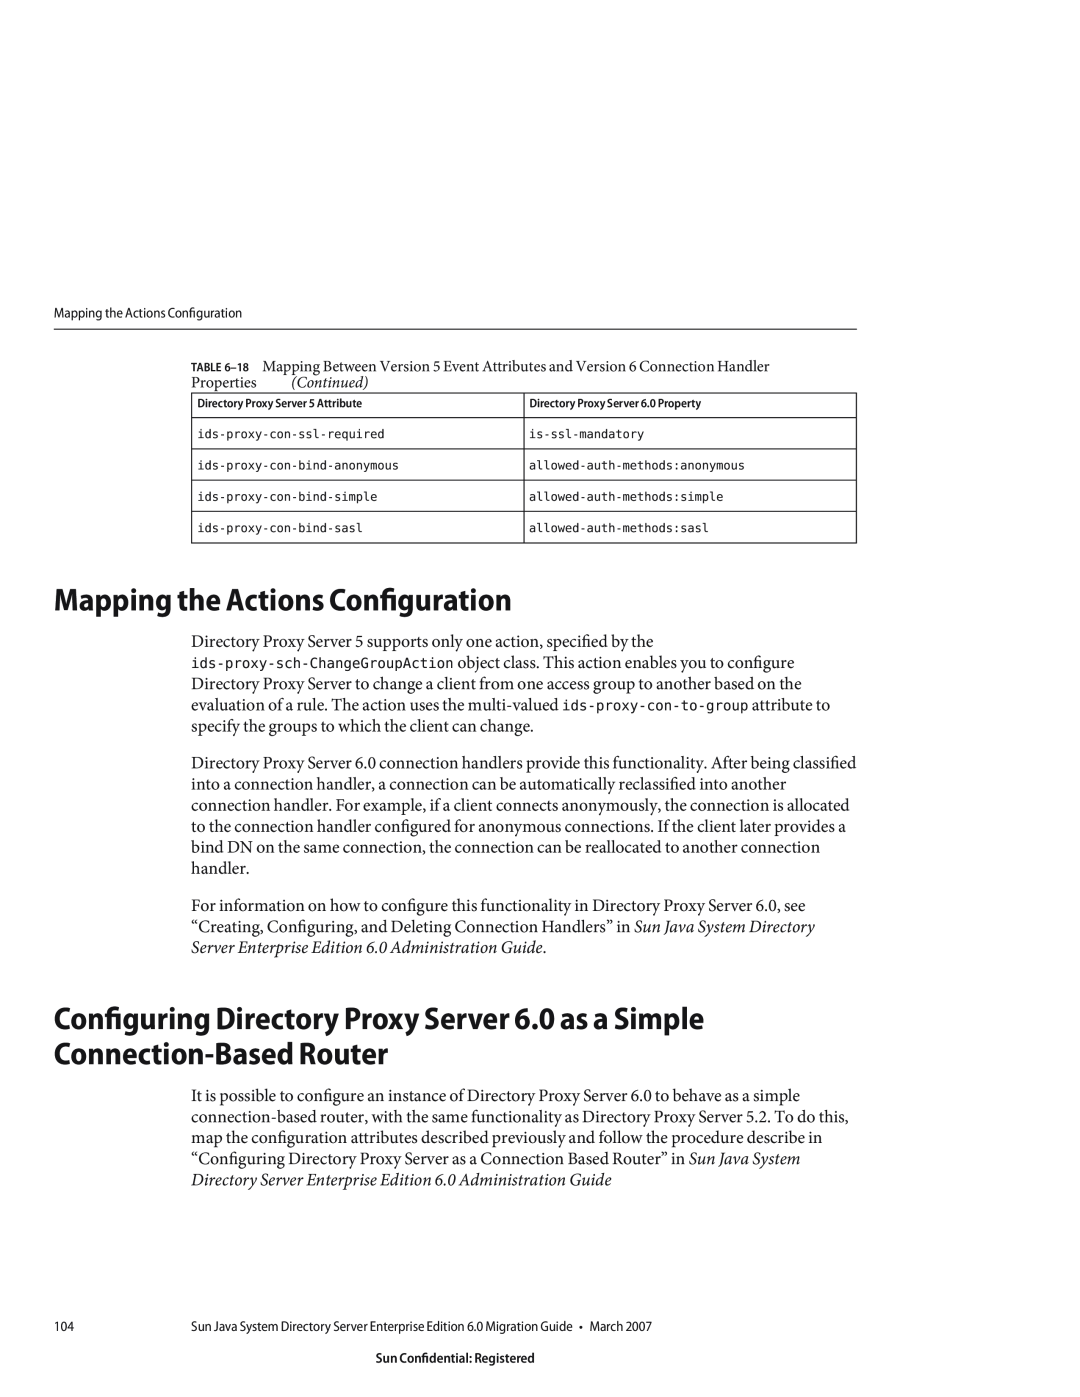 Sun Microsystems 8190994 manual Mapping the Actions Configuration, Properties 